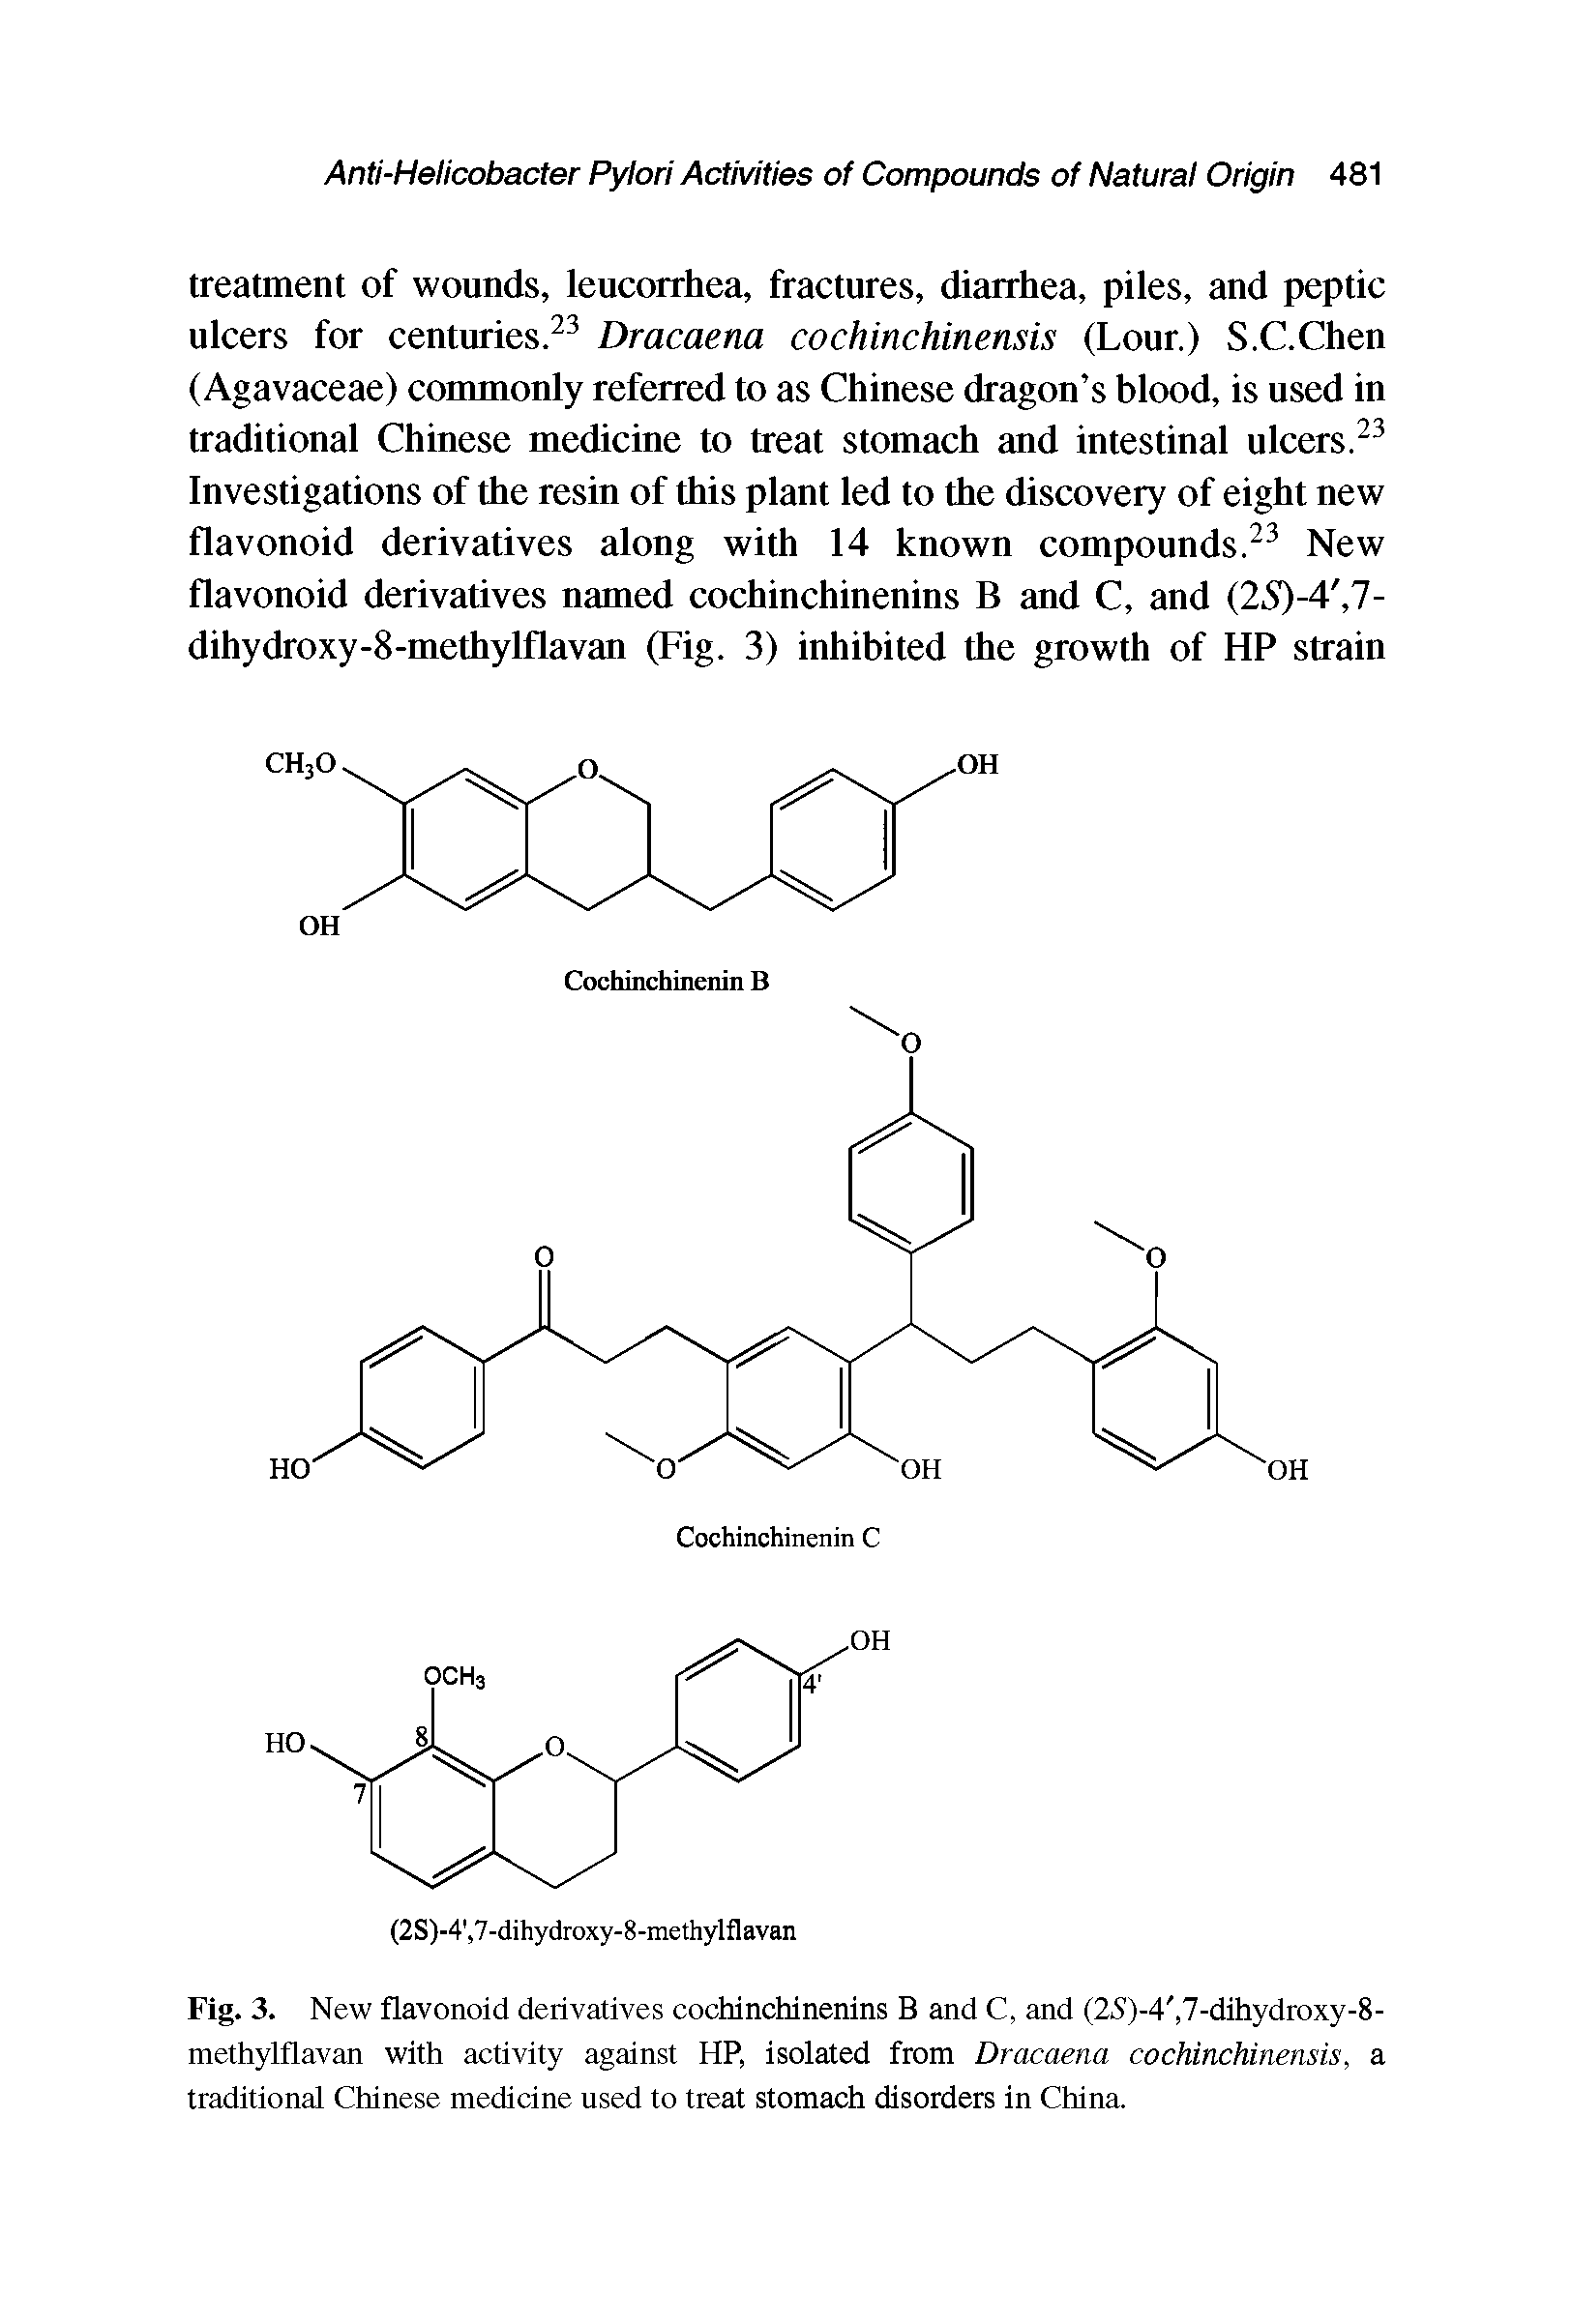 Fig. 3. New flavonoid derivatives cochinchinenins B and C, and (25)-4, 7-dihydroxy-8-methylflavan with activity against HP, isolated from Dracaena cochinchinensis, a traditional Chinese medicine used to treat stomach disorders in China.